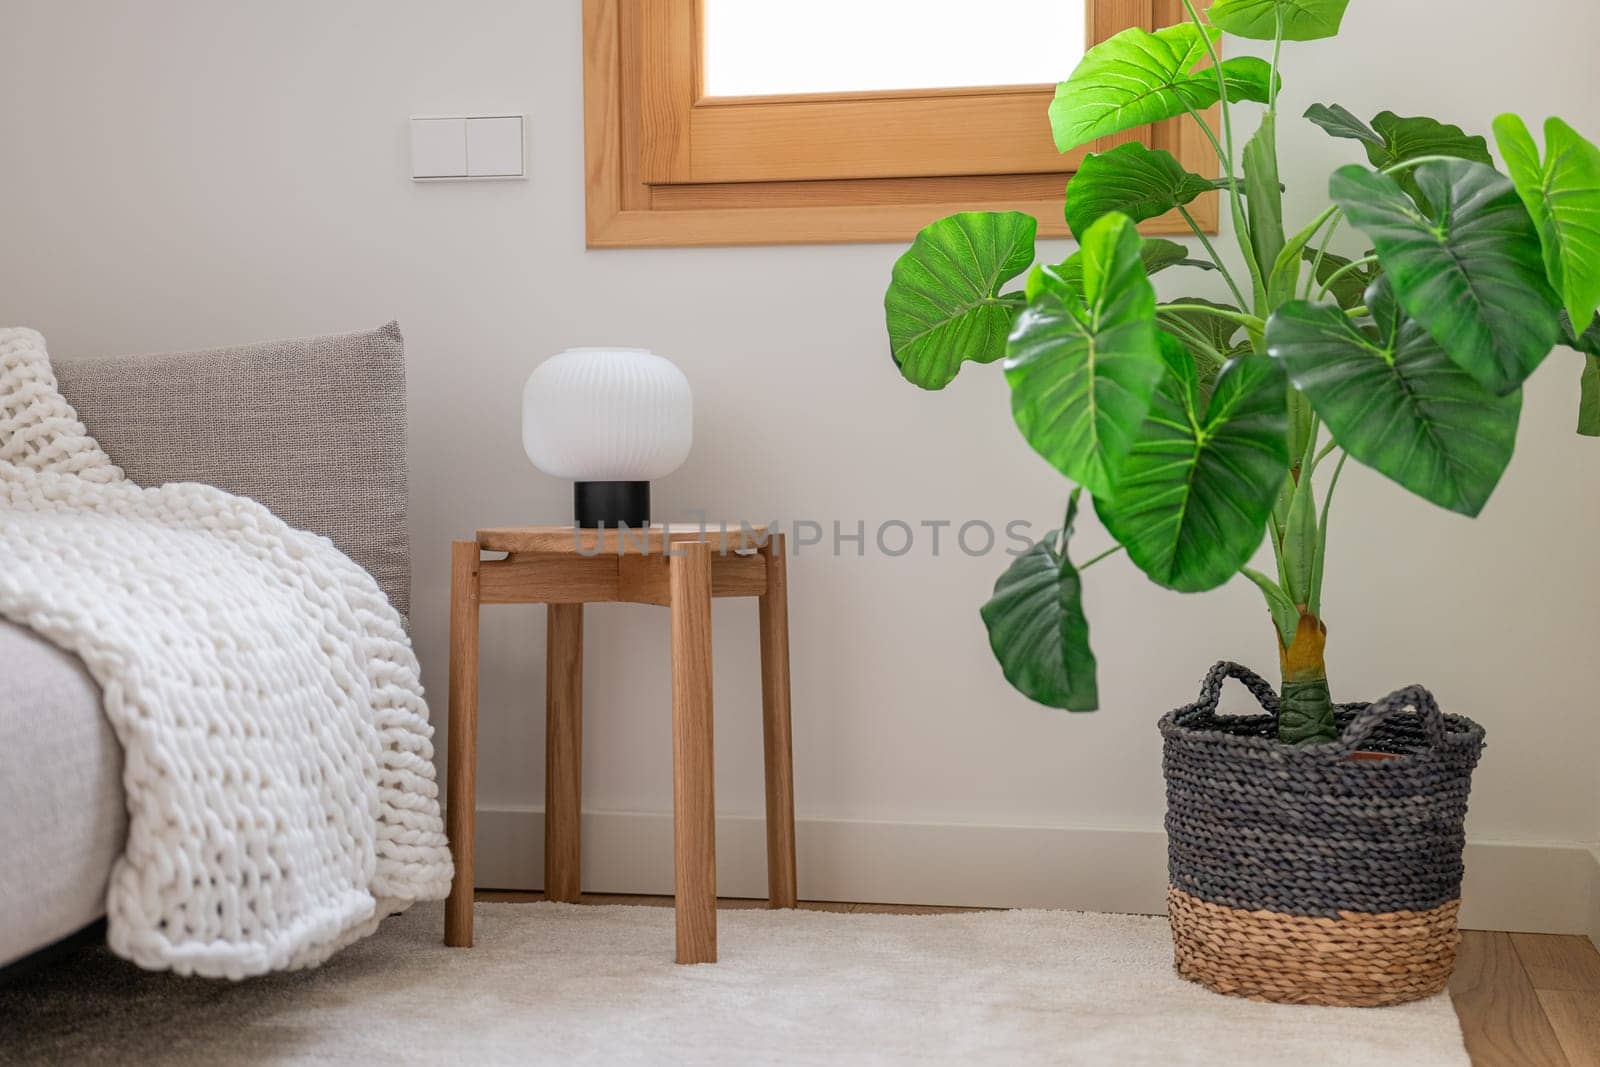 Pot with flower on floor of bedroom next to stool with light and terry bathrobe put sofa. Created coziness in renovated room with wooden window